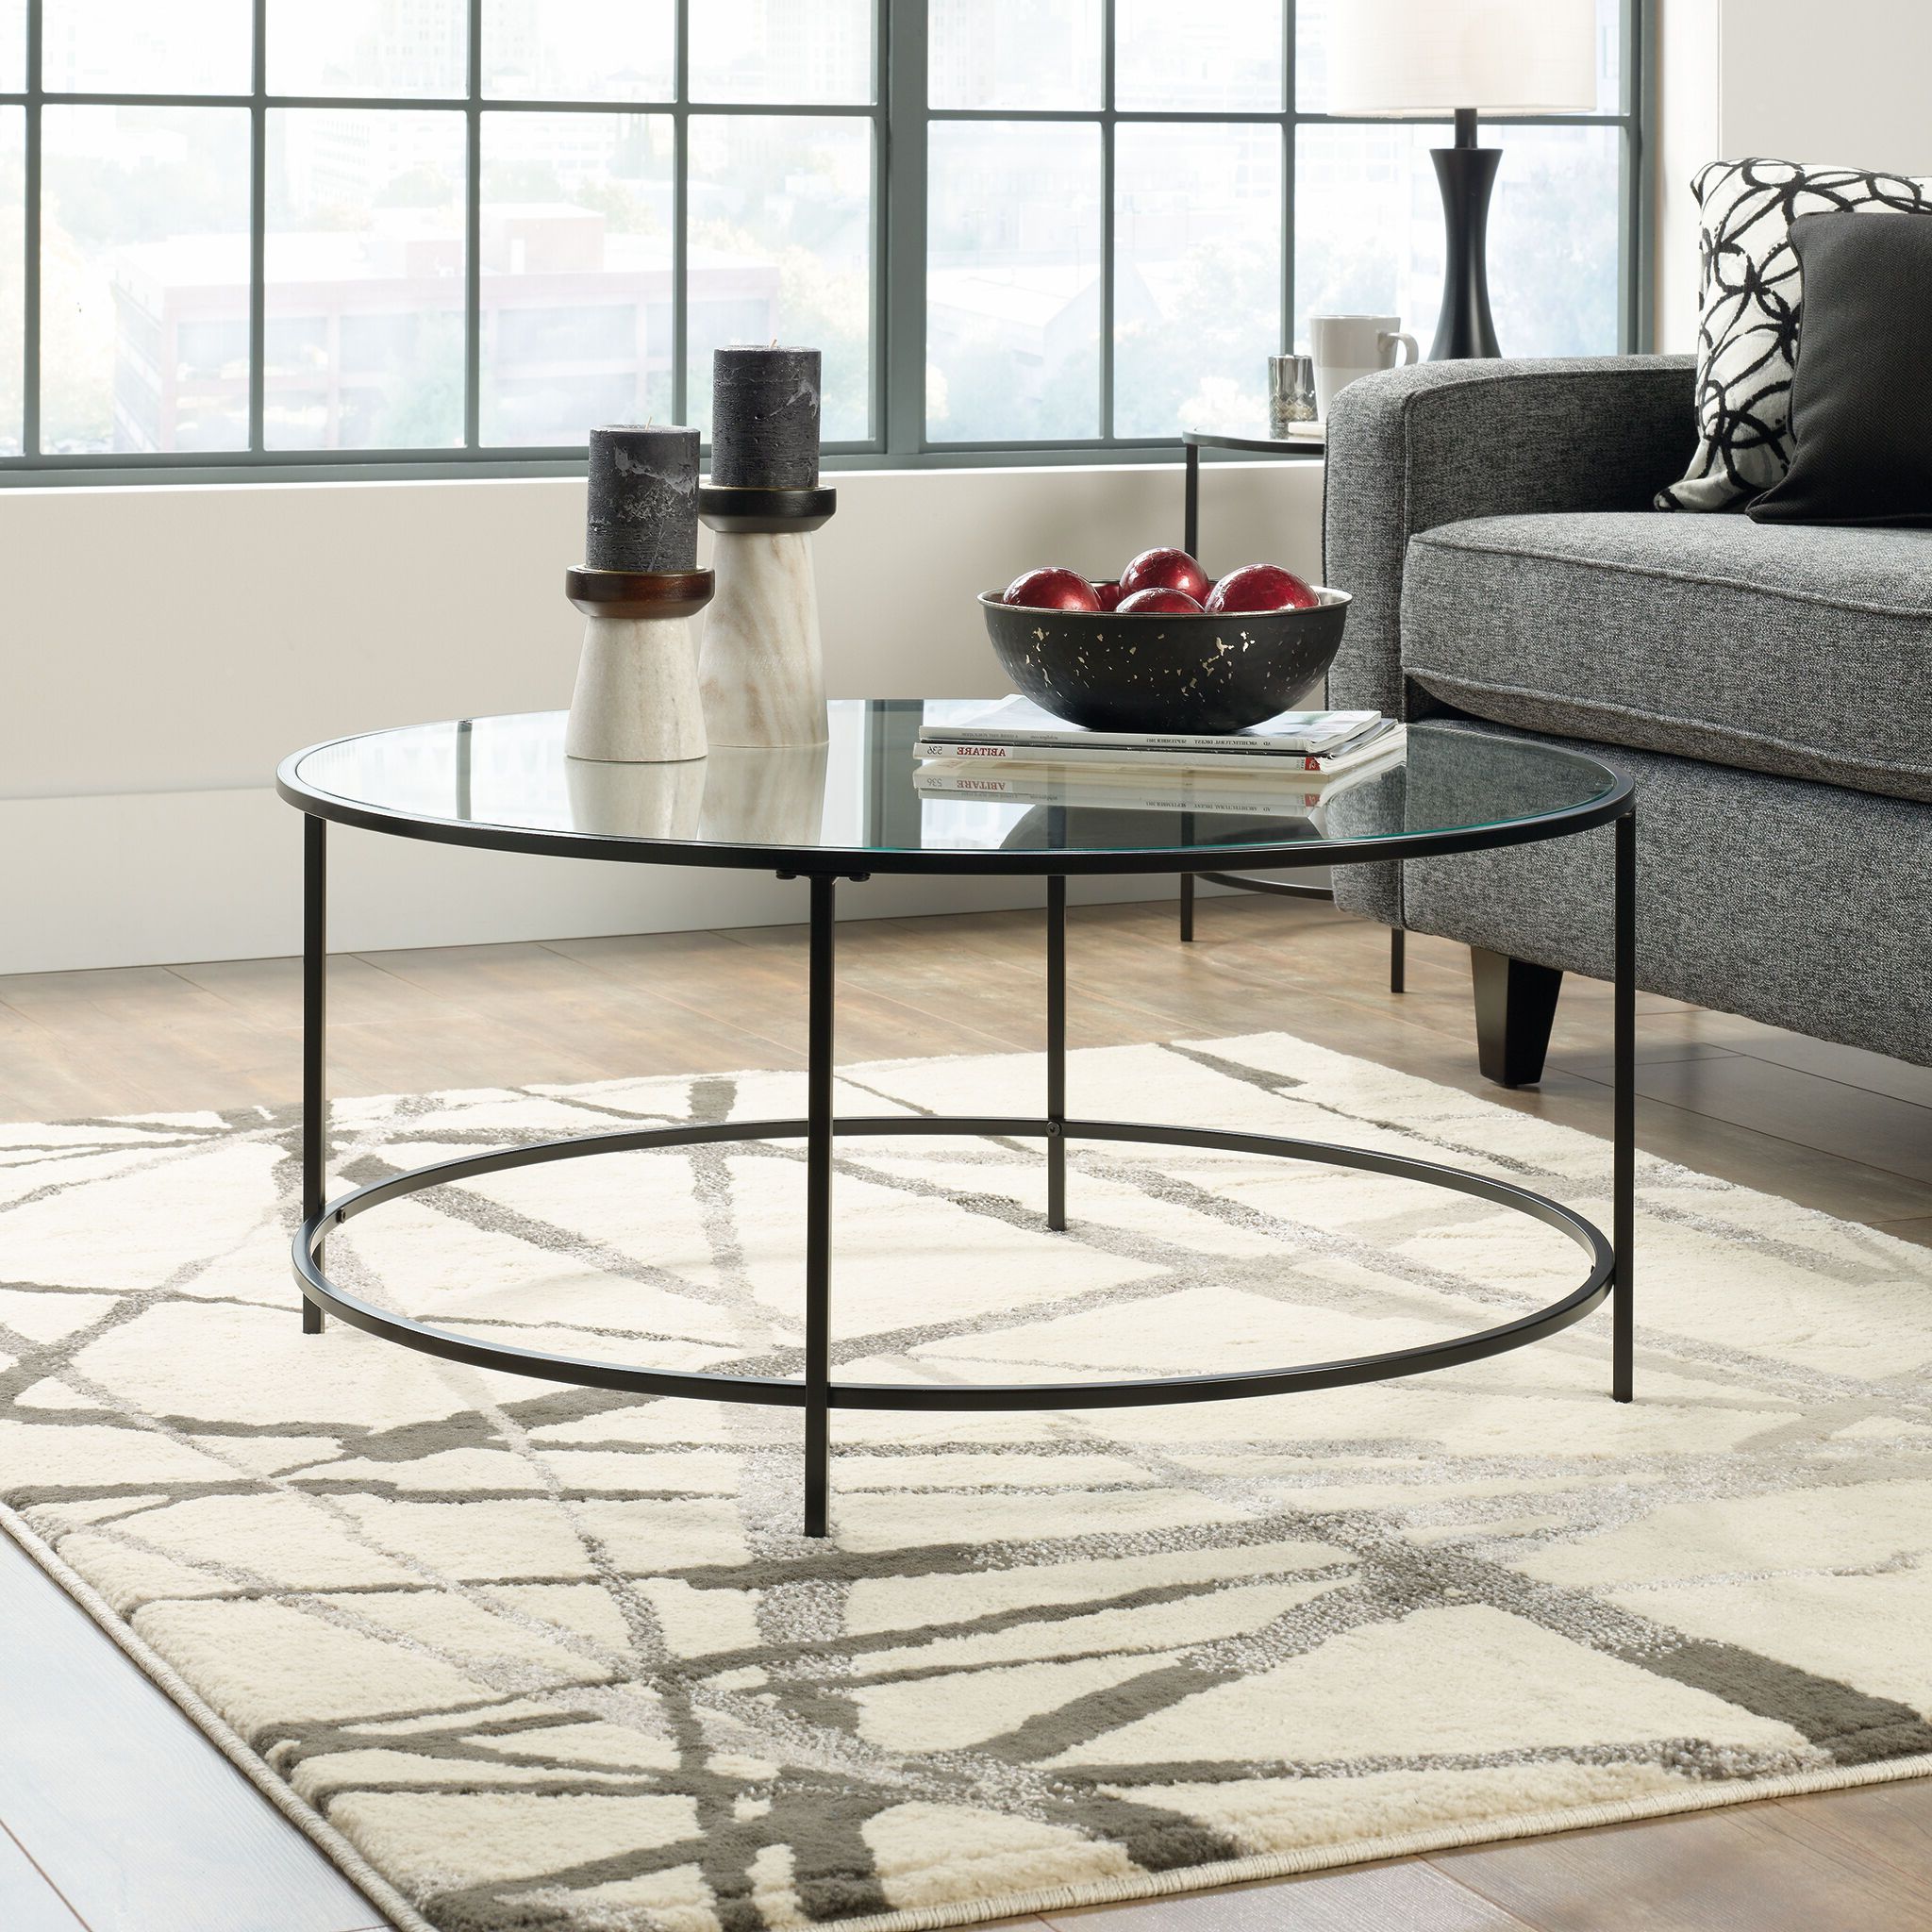 Round Contemporary Coffee Table In Black | Mathis Brothers Furniture With Regard To Full Black Round Coffee Tables (View 2 of 20)